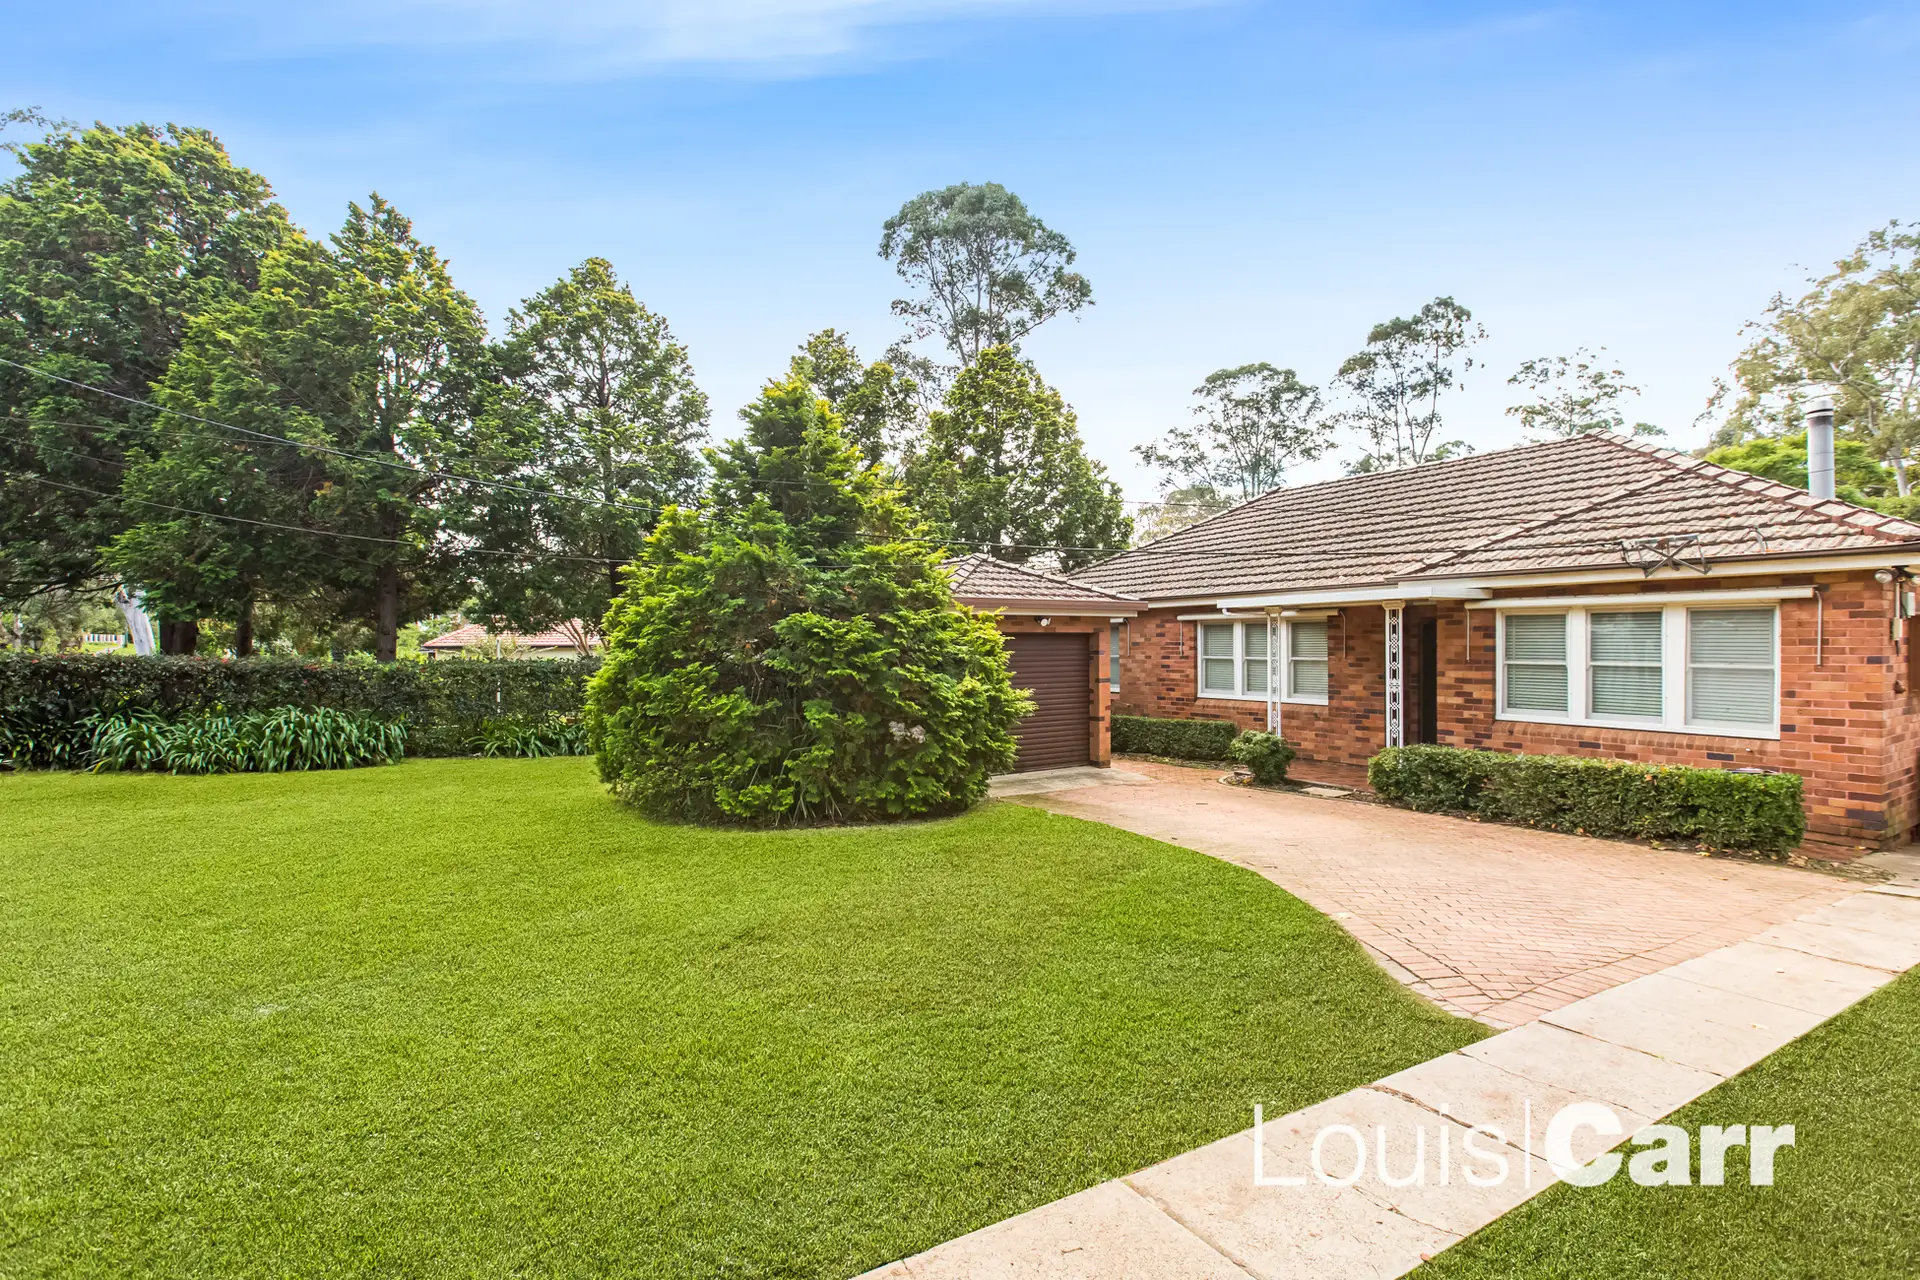 Photo #1: 92 Cardinal Avenue, West Pennant Hills - Sold by Louis Carr Real Estate